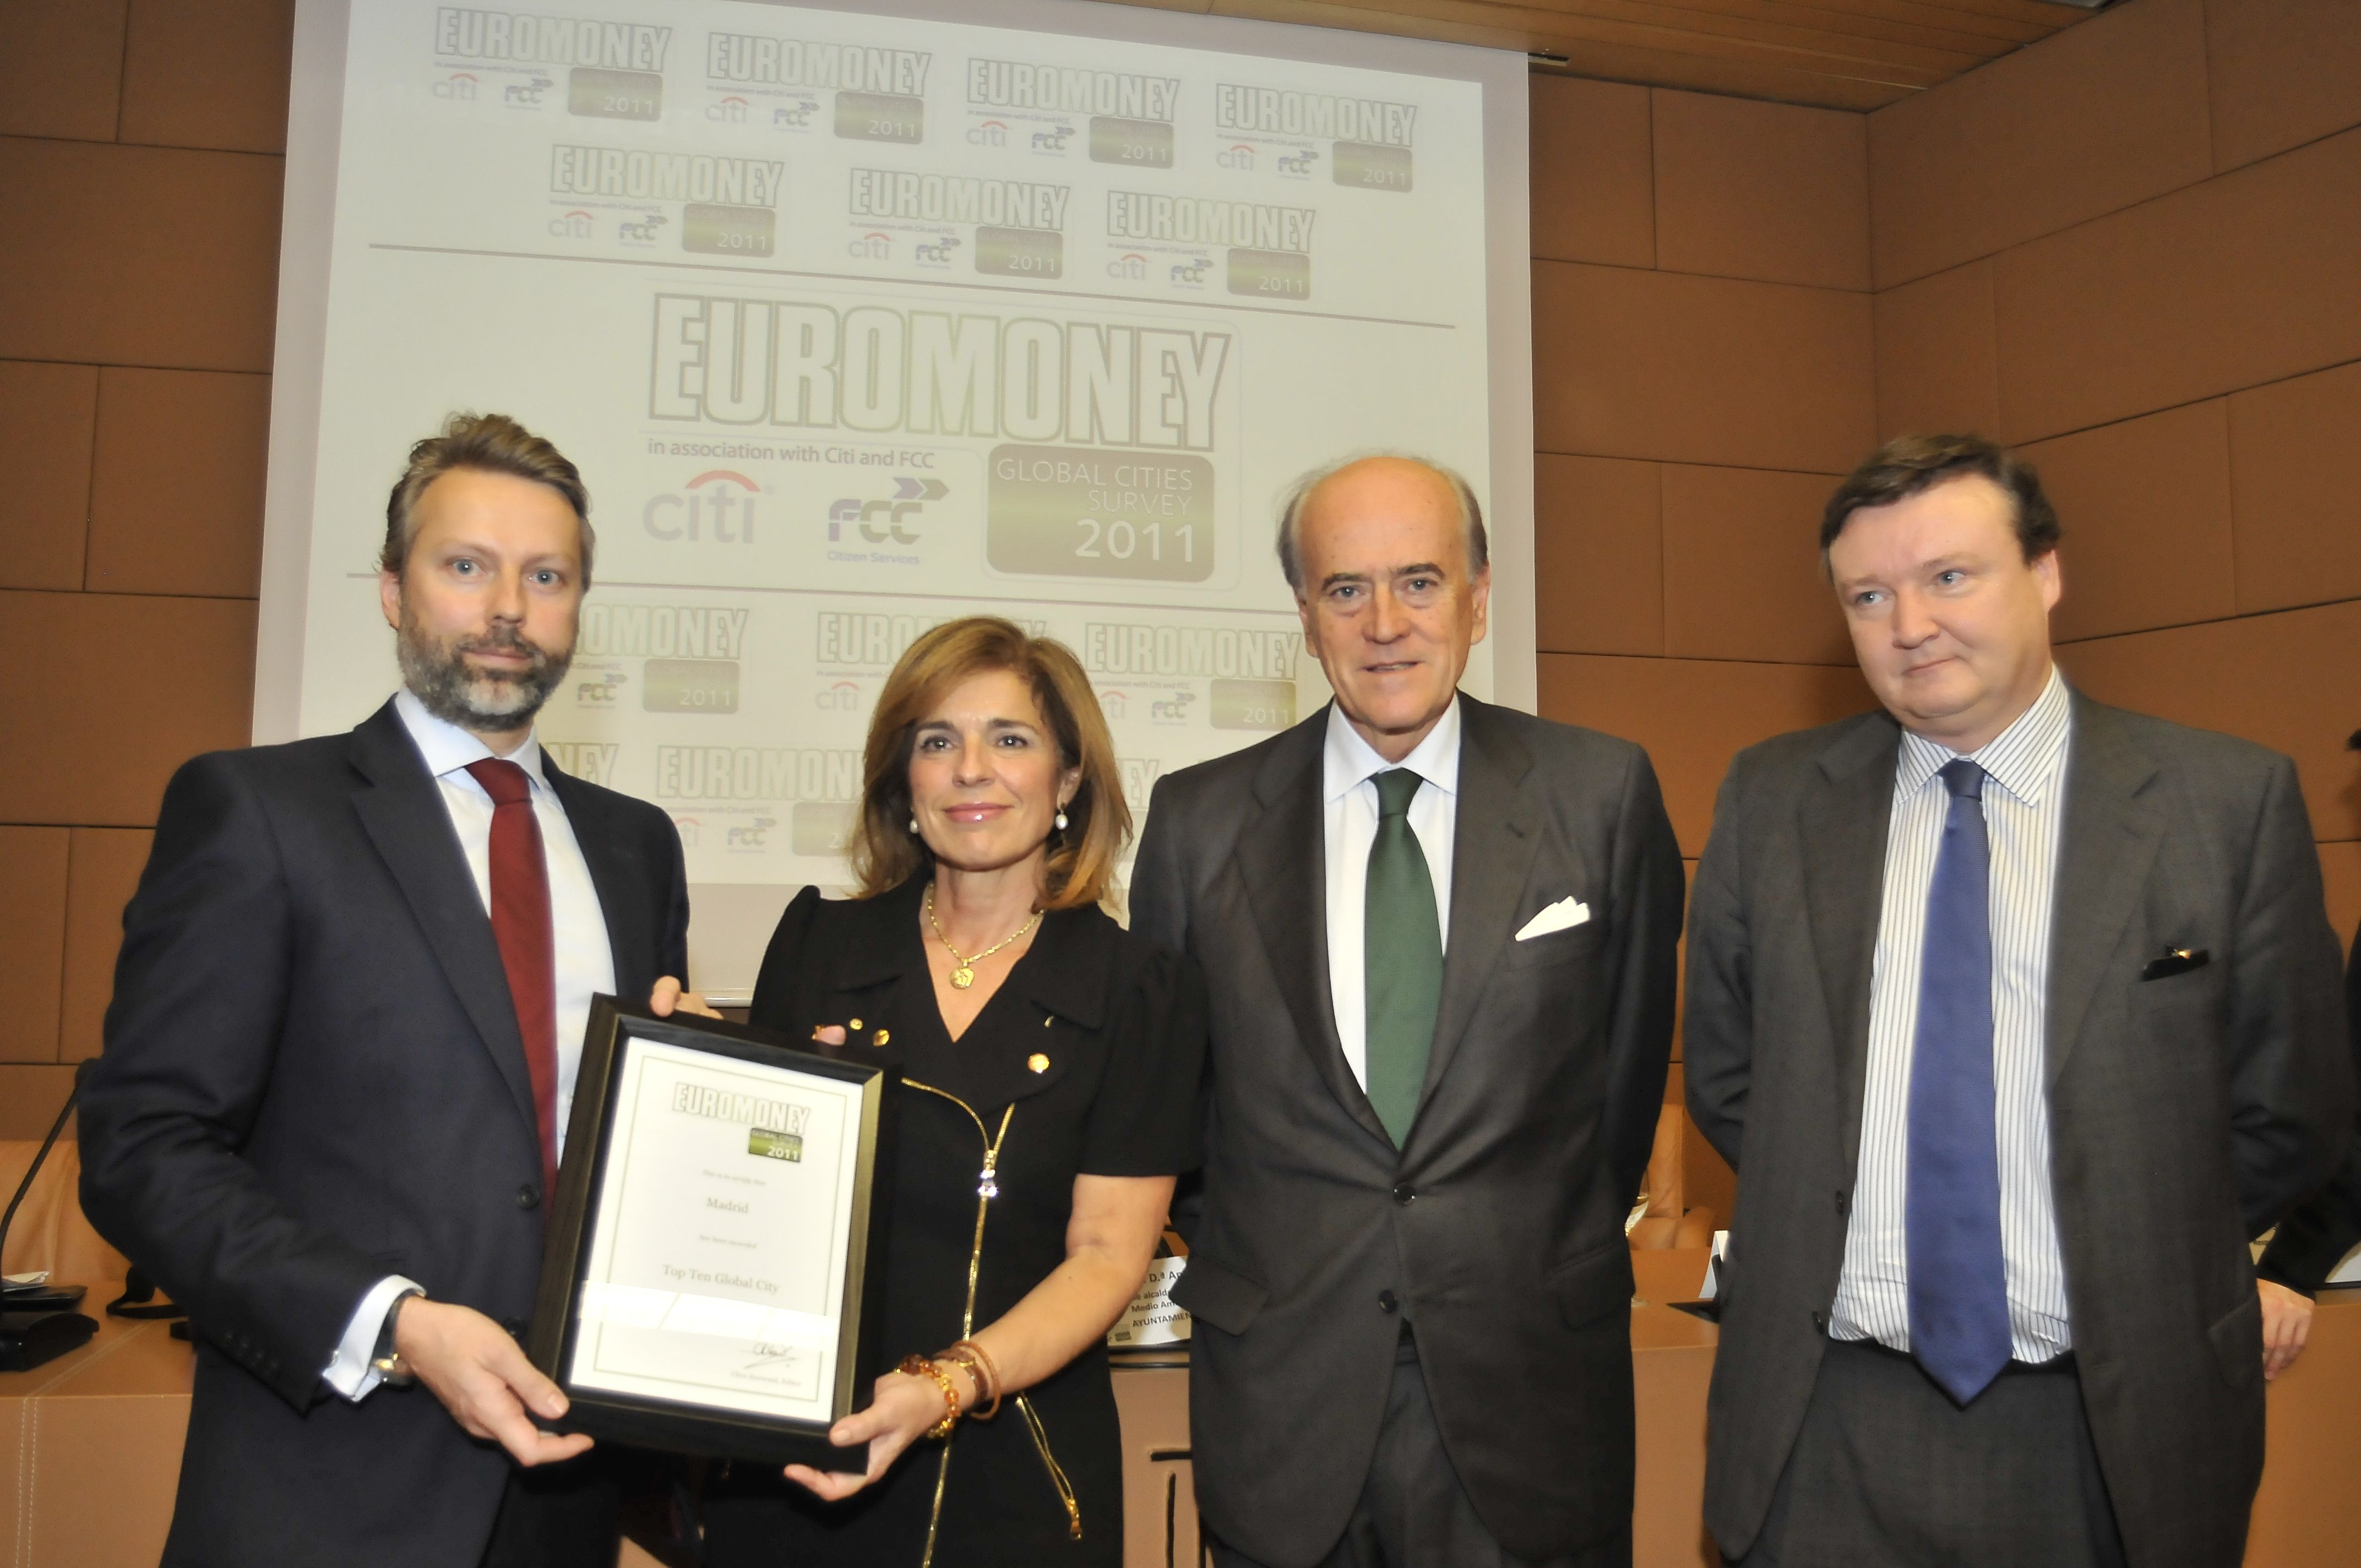 Madrid ranks as world's 7th most competitive and attractive city for business in Euromoney magazine's 2011 Global Cities Survey